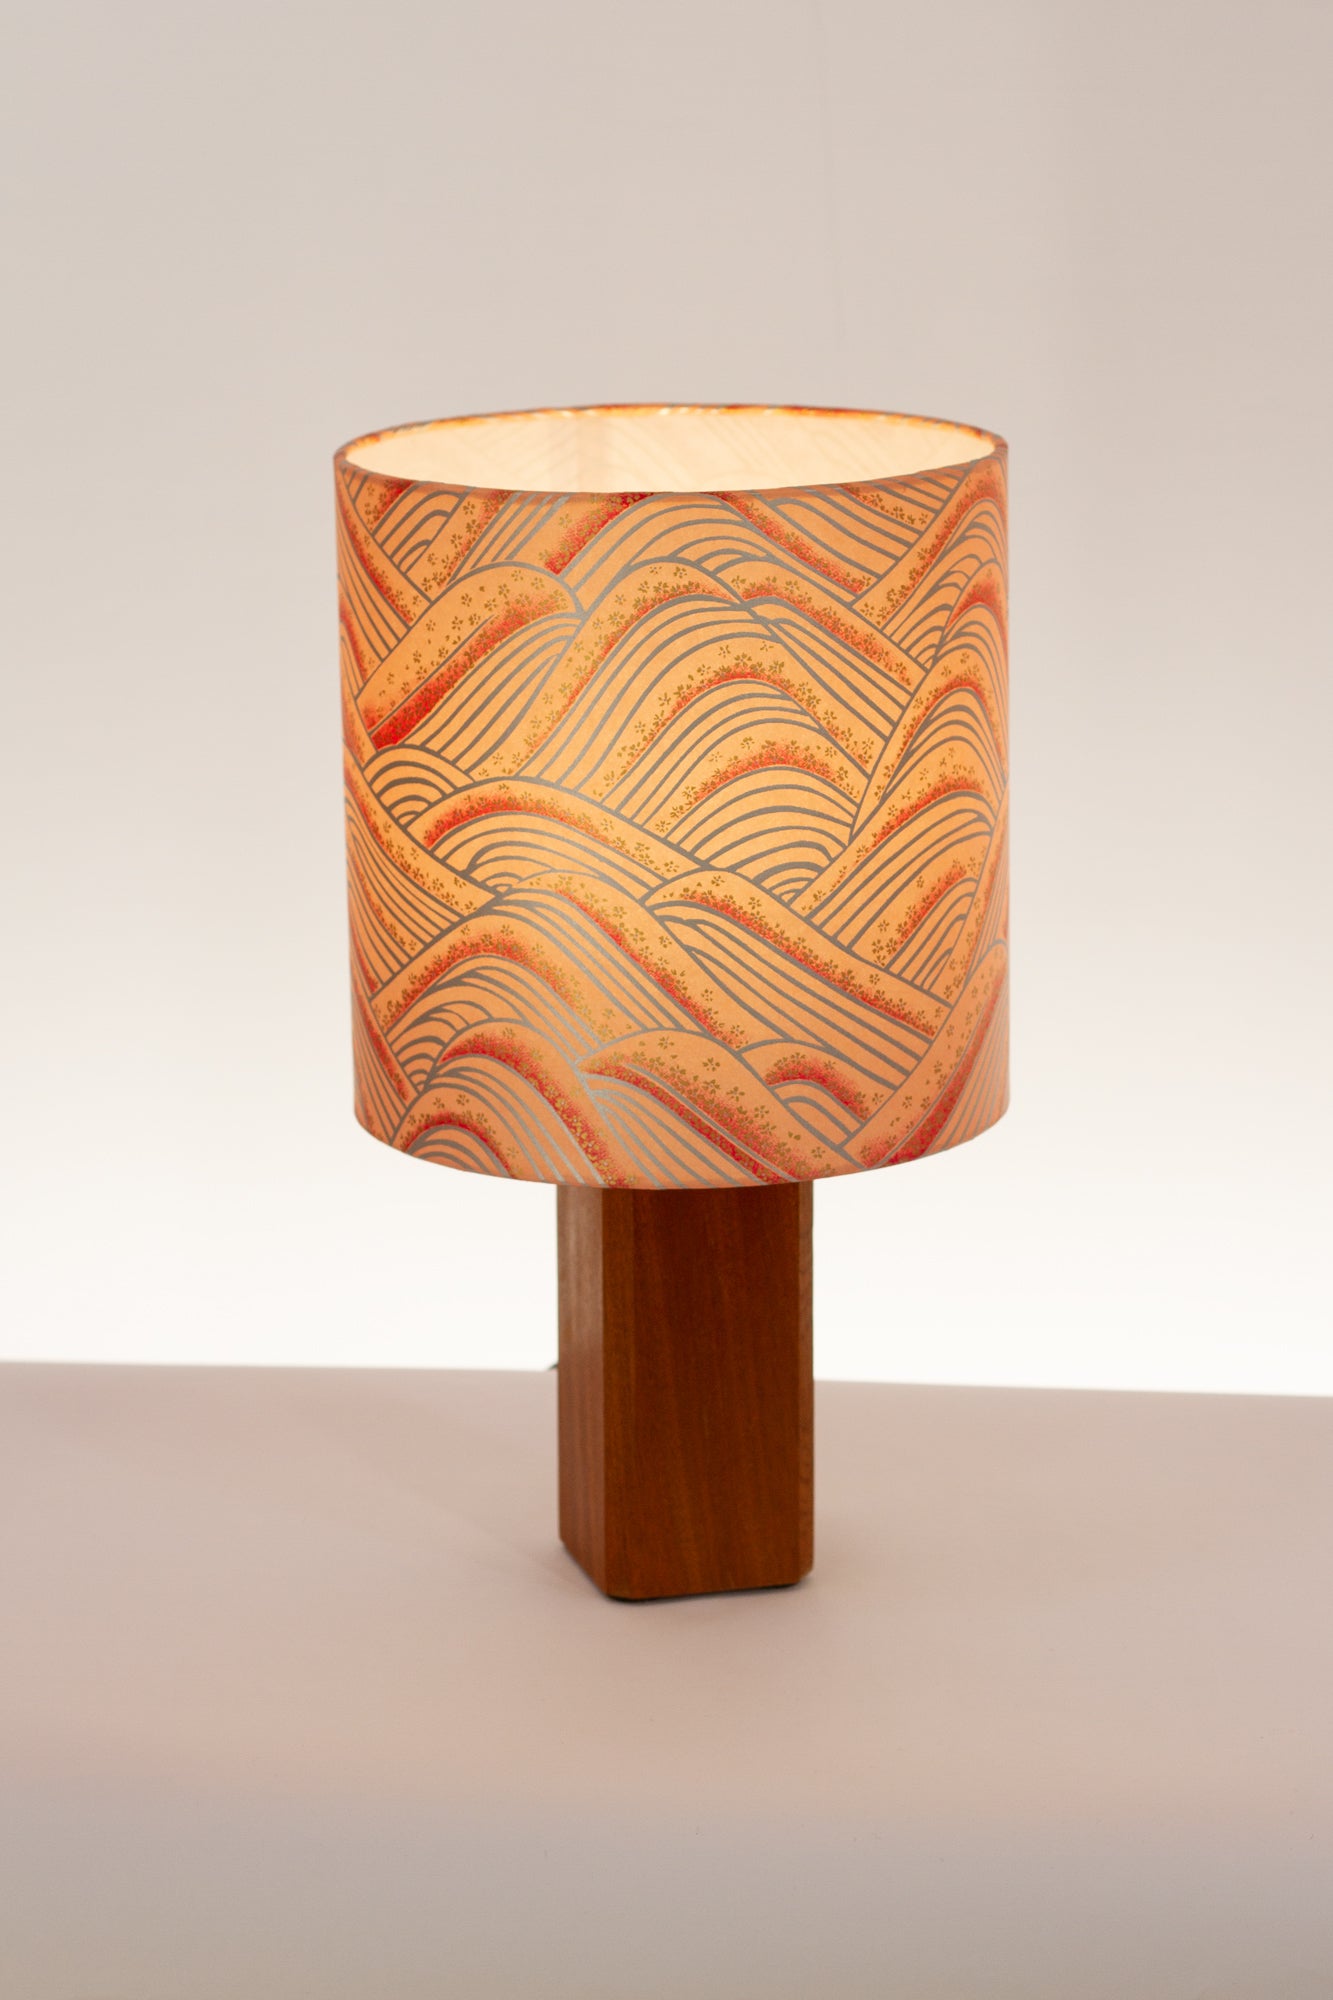 Square Sapele Table Lamp with 20cm Drum Lamp Shade W09 ~ Peach Hills